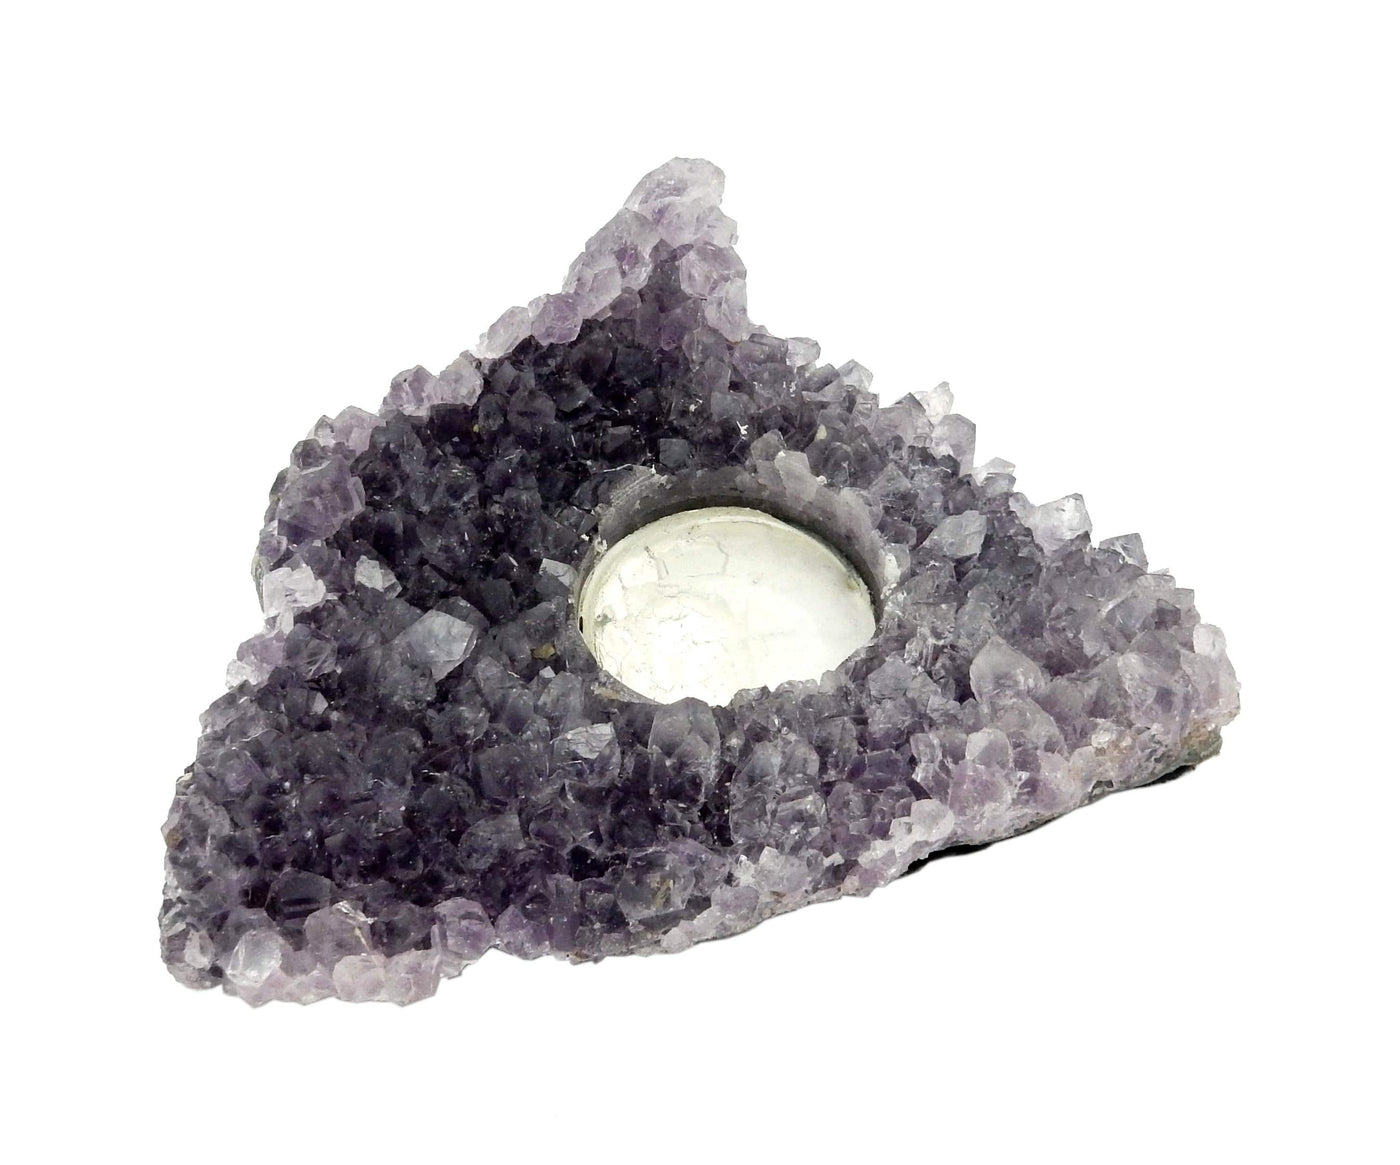 One amethyst candle holder on a white background.